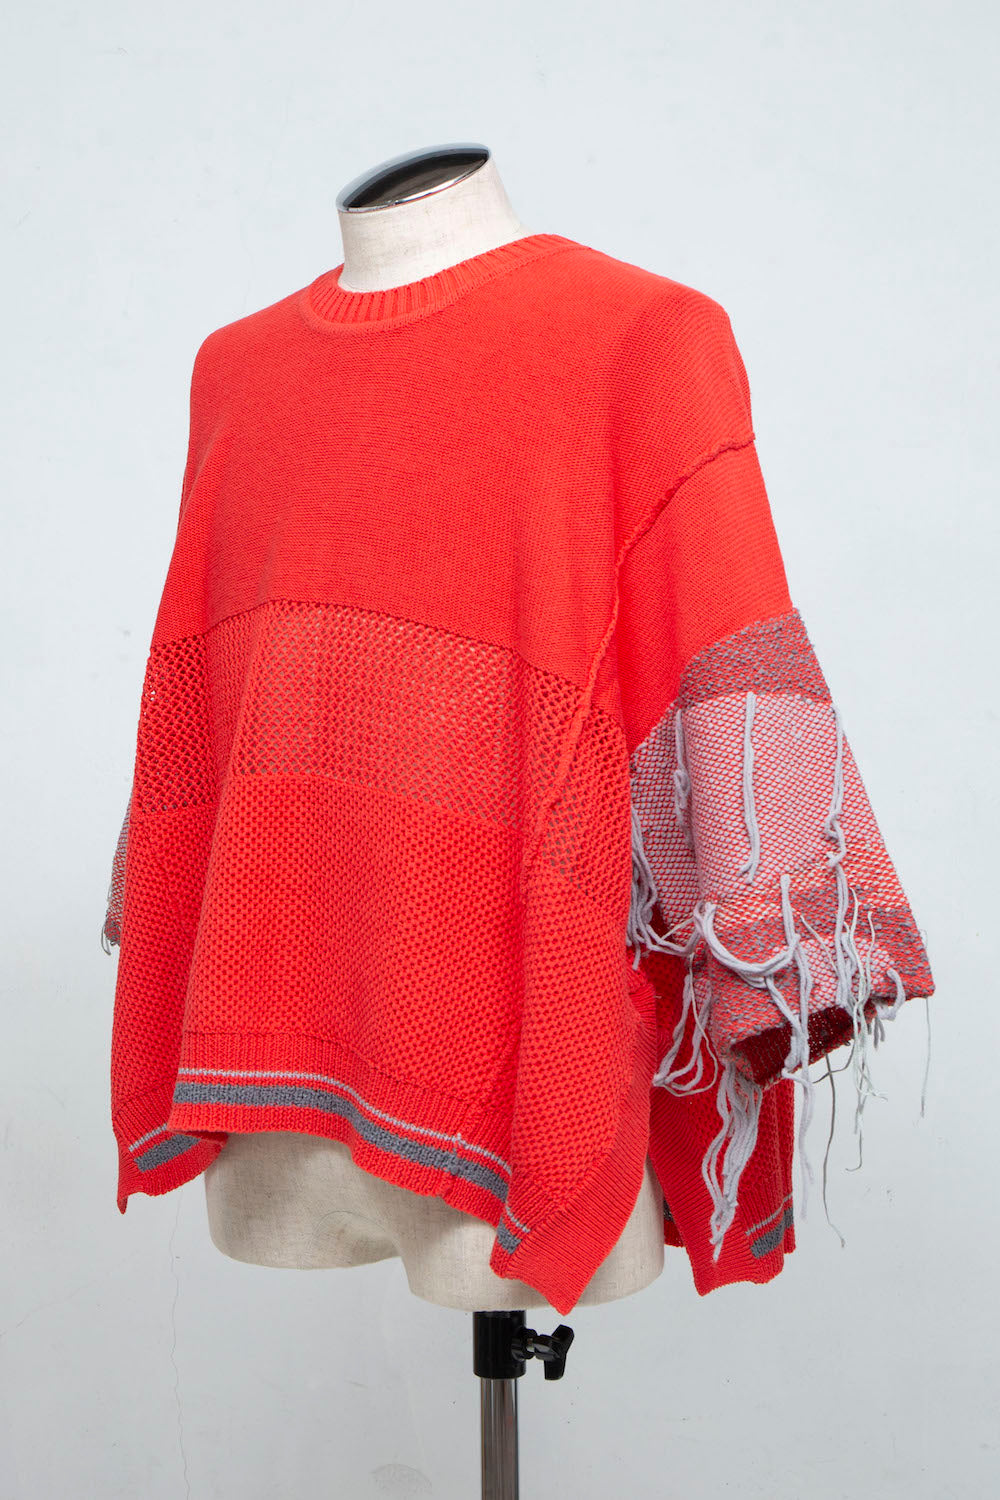 *Limited Edition* LB24SS-KNPS01-TRA-TE | Thread Intarsia Summer Knit Crew Neck | RED ORANGE 